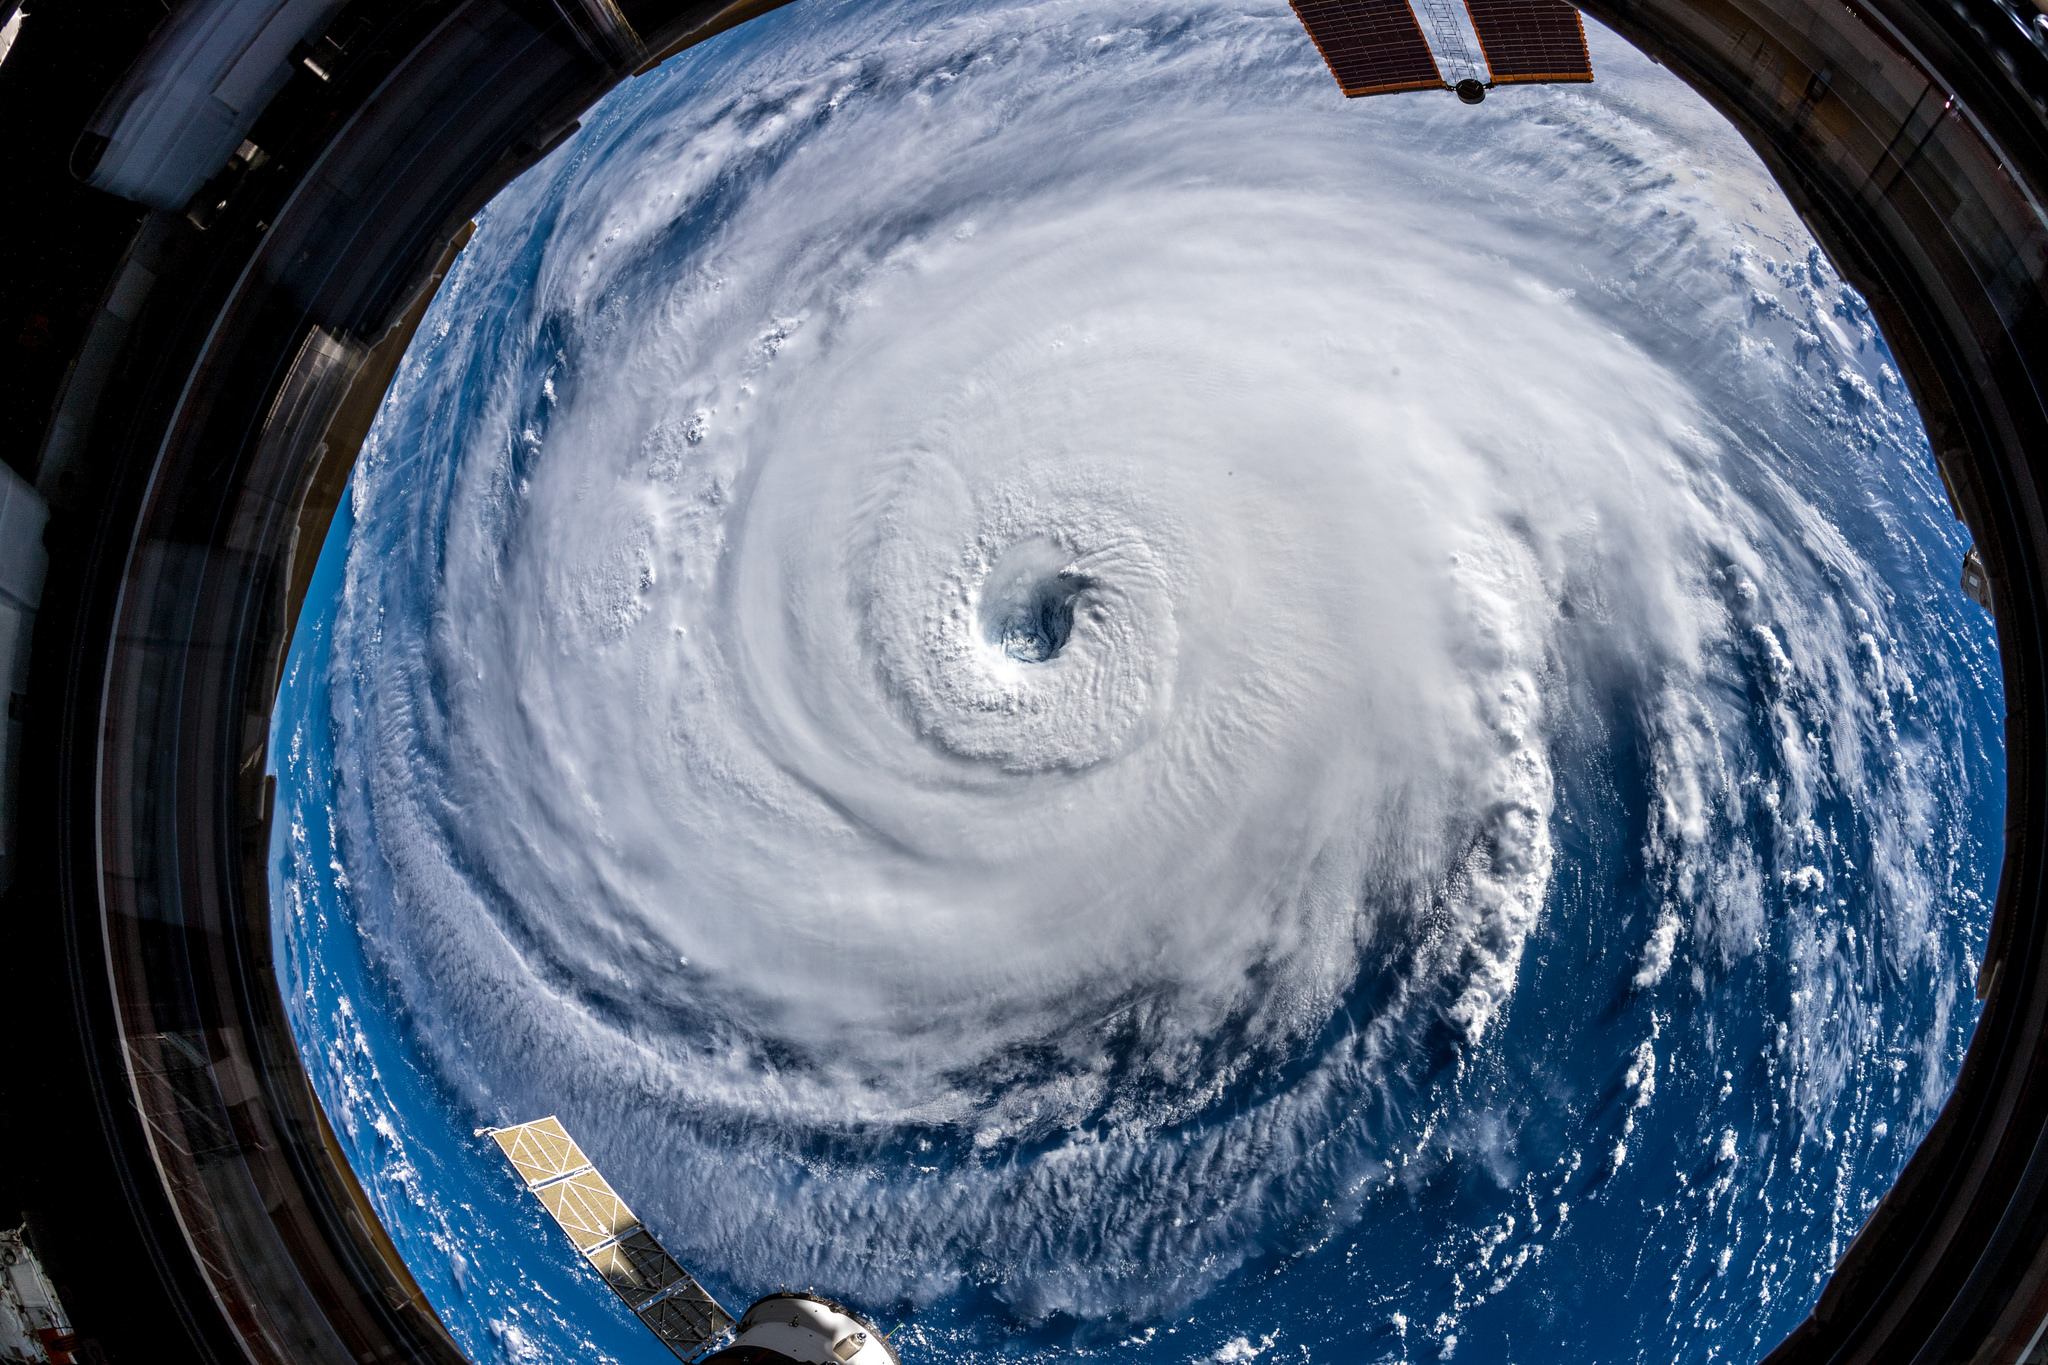 PHOTO: Ever stared down the gaping eye of a category 4 hurricane? It's chilling, even from space. #HurricaneFlorence #Horizons 